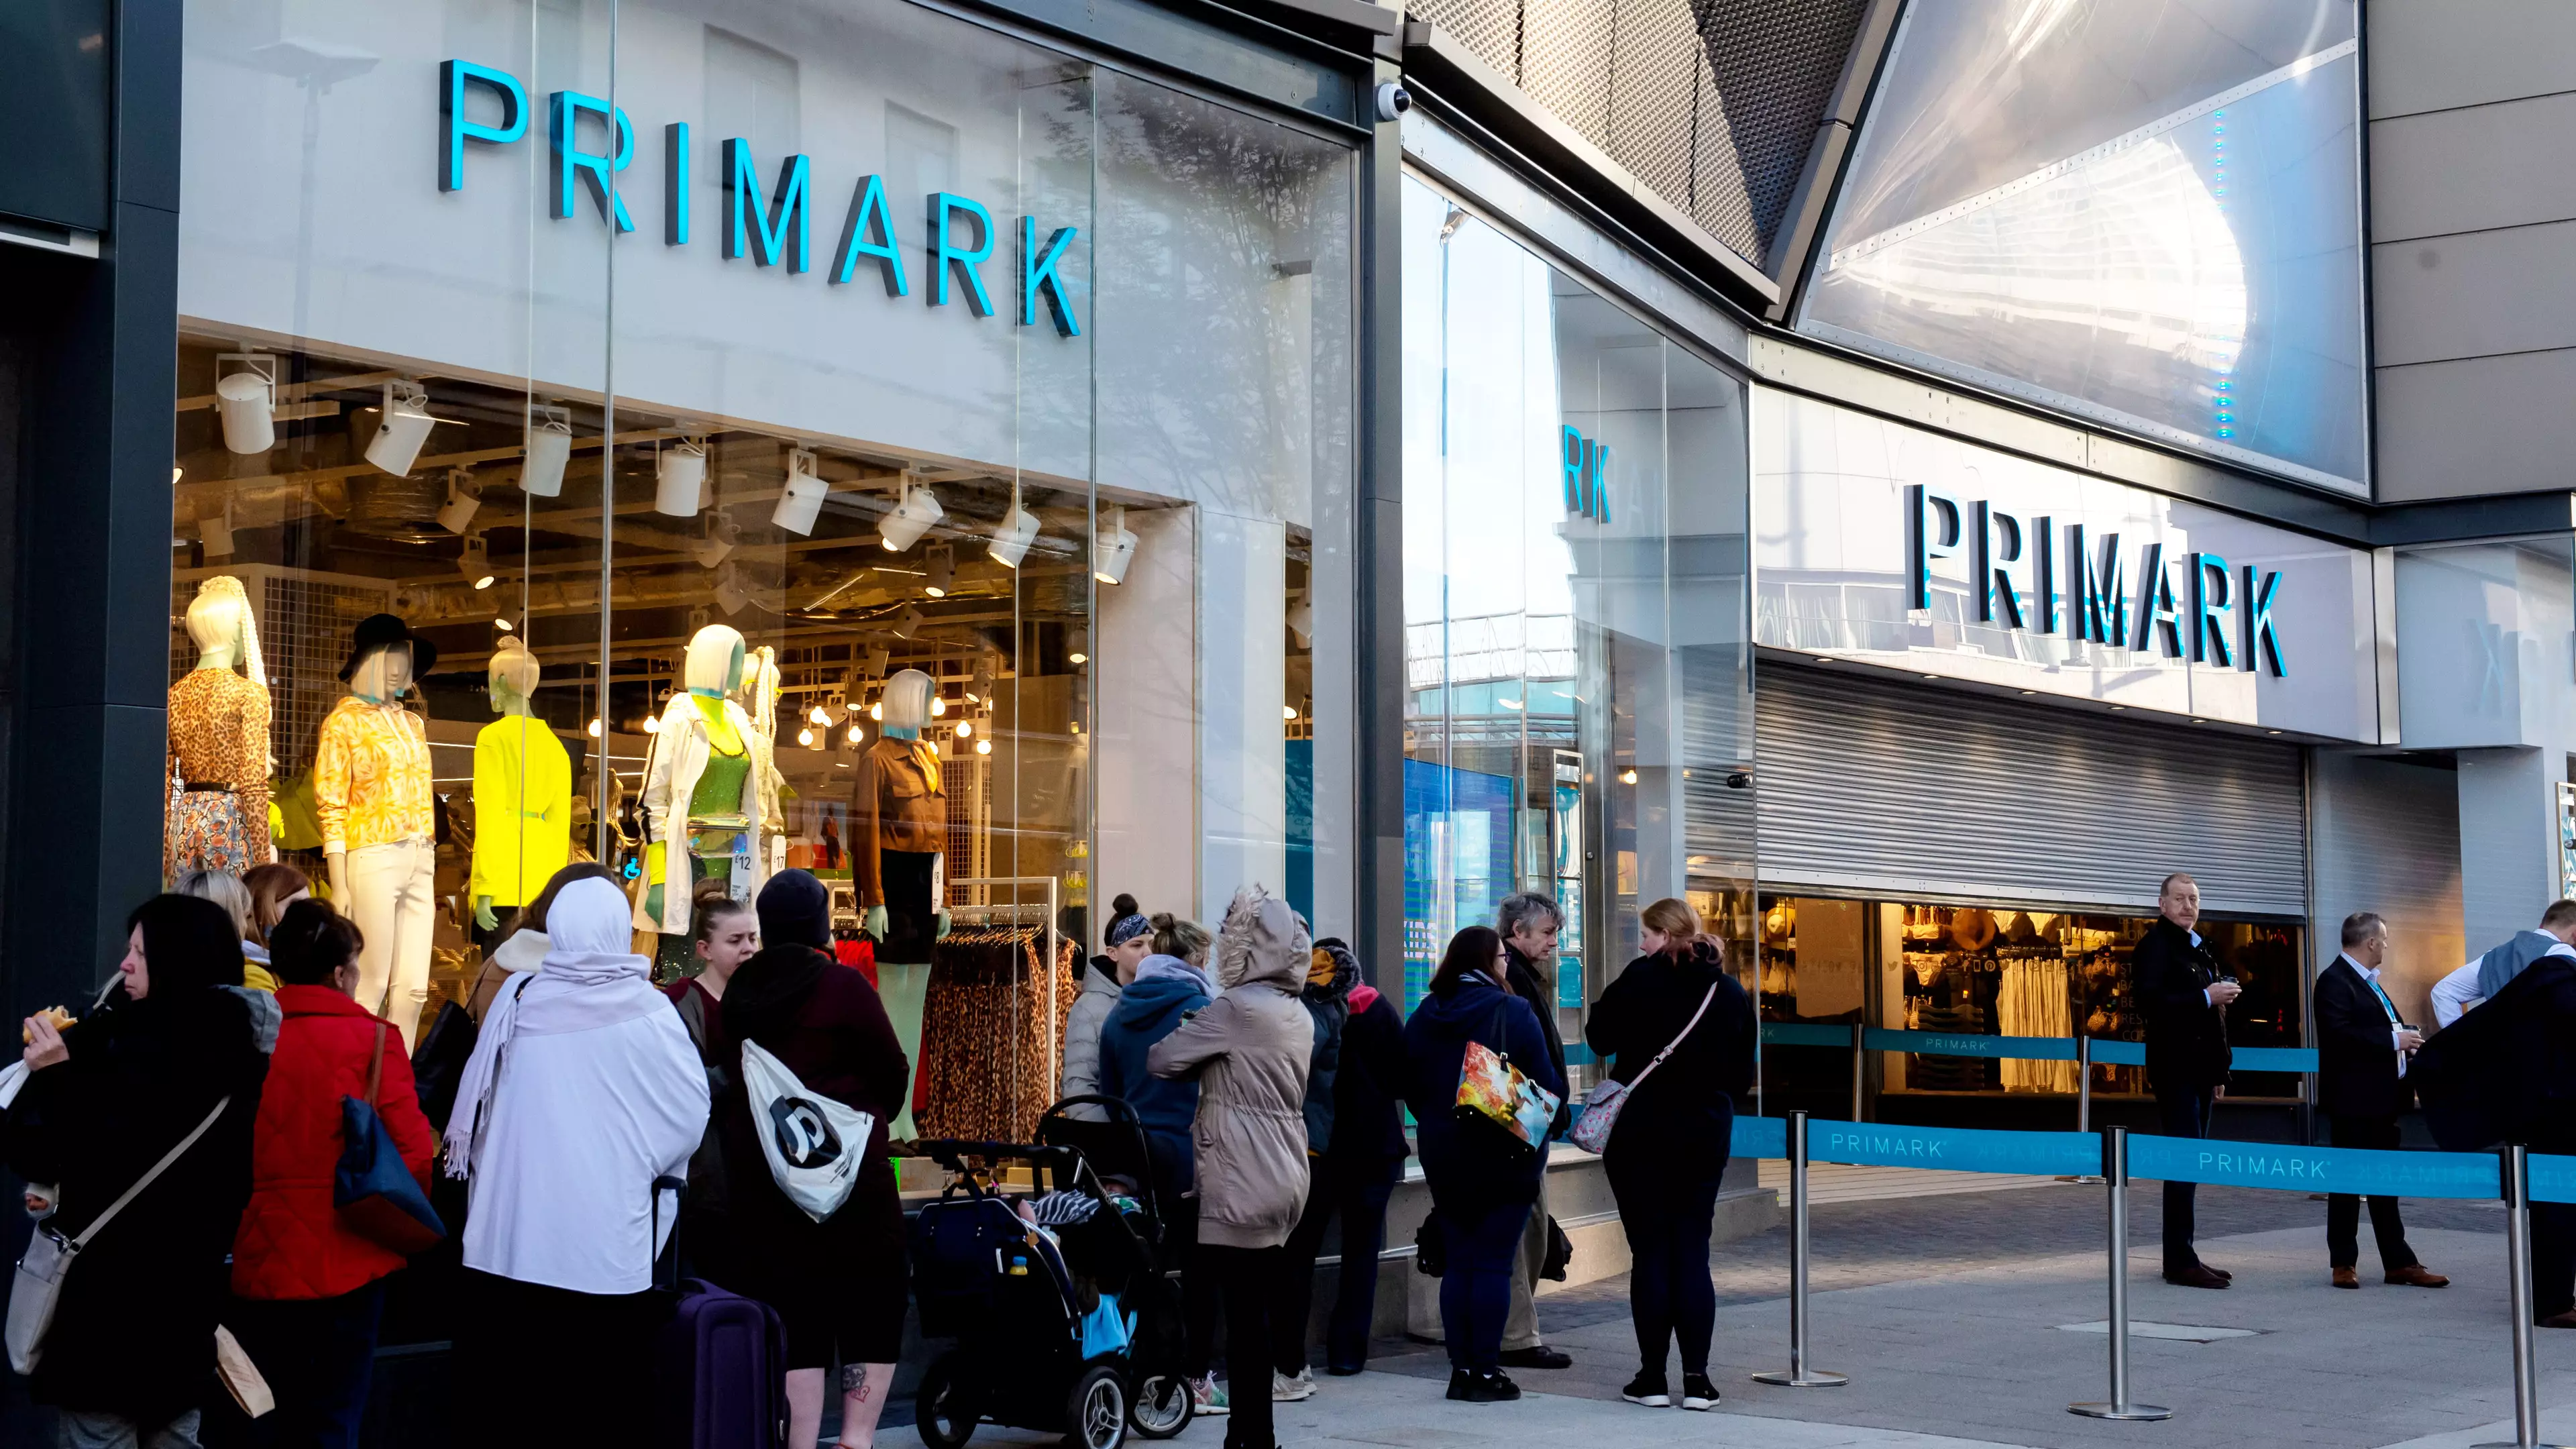 Hundreds Queue To Be First Through Doors Of World's Biggest Primark